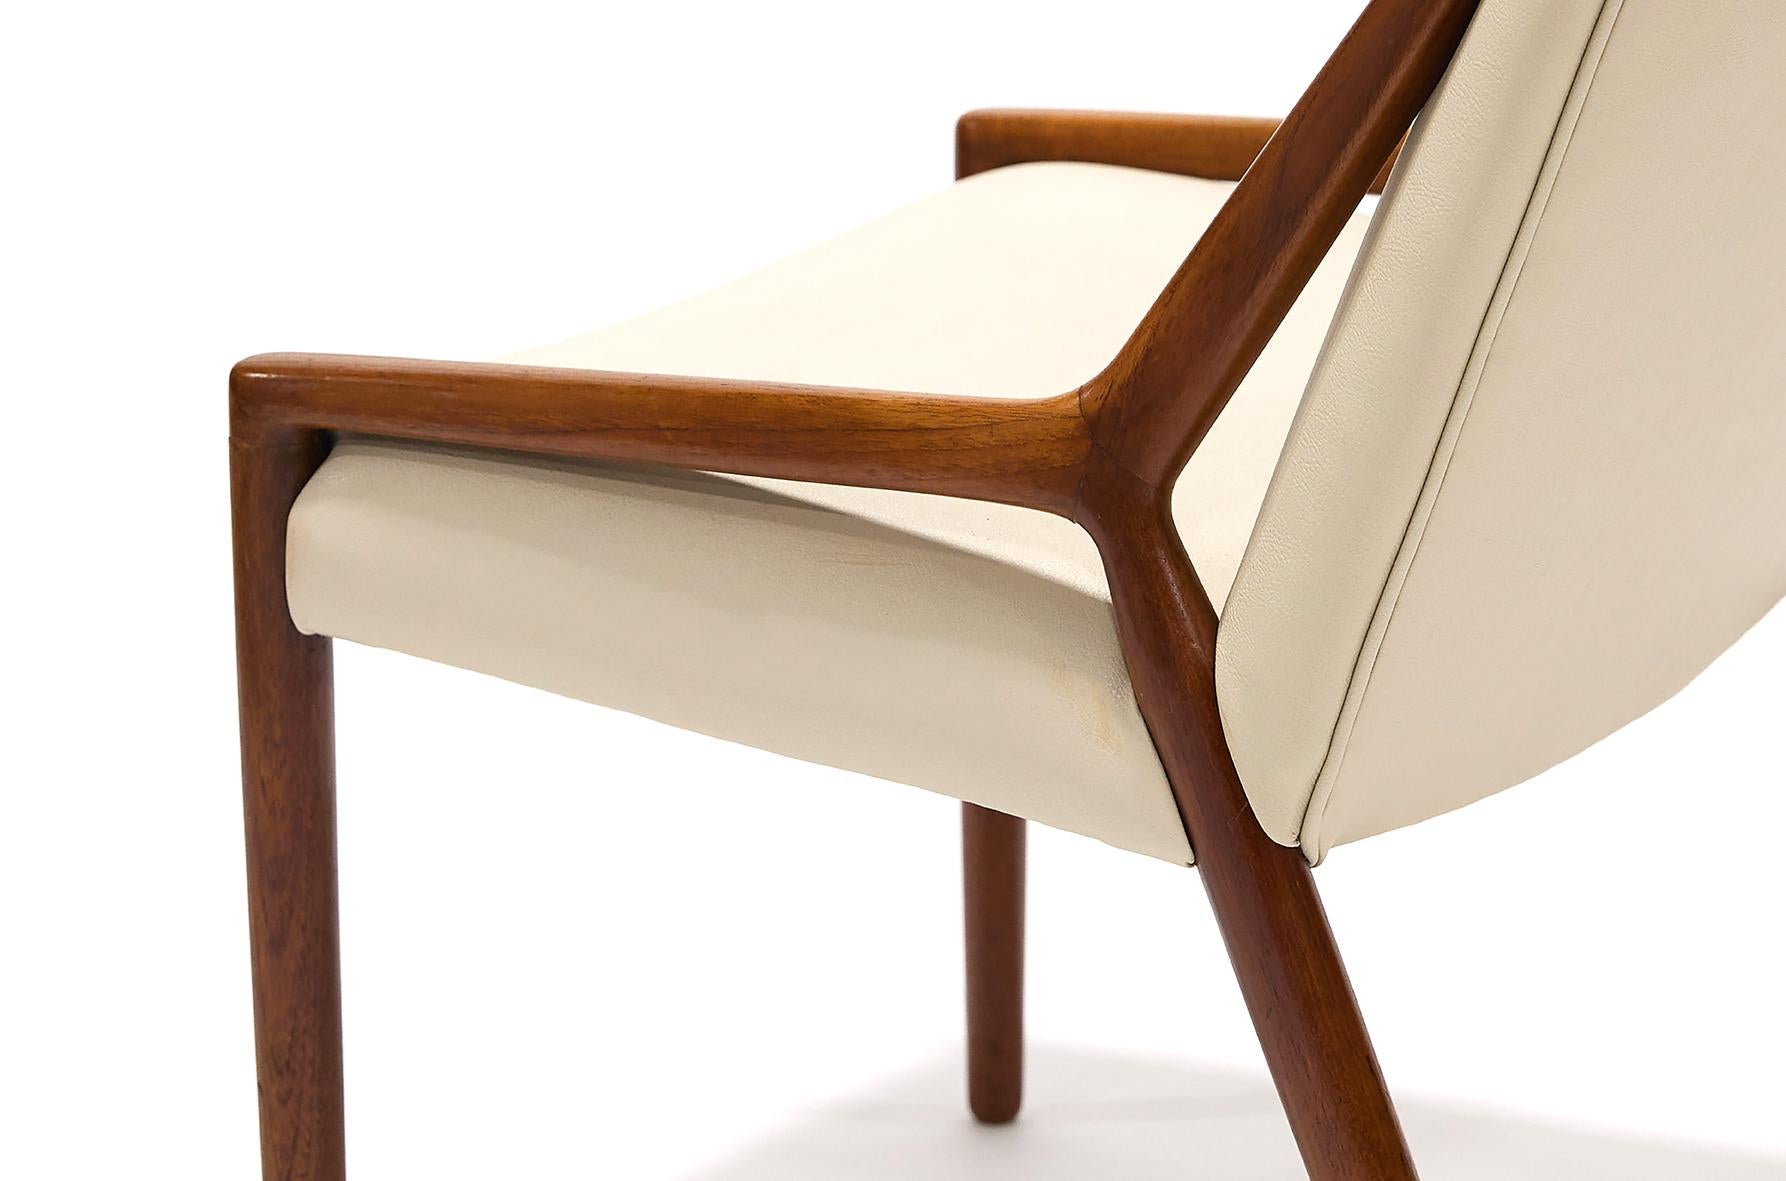 Pair of Ejner Larsen and Aksel Bender Madsen Chairs for Willy Beck, 1951 For Sale 1